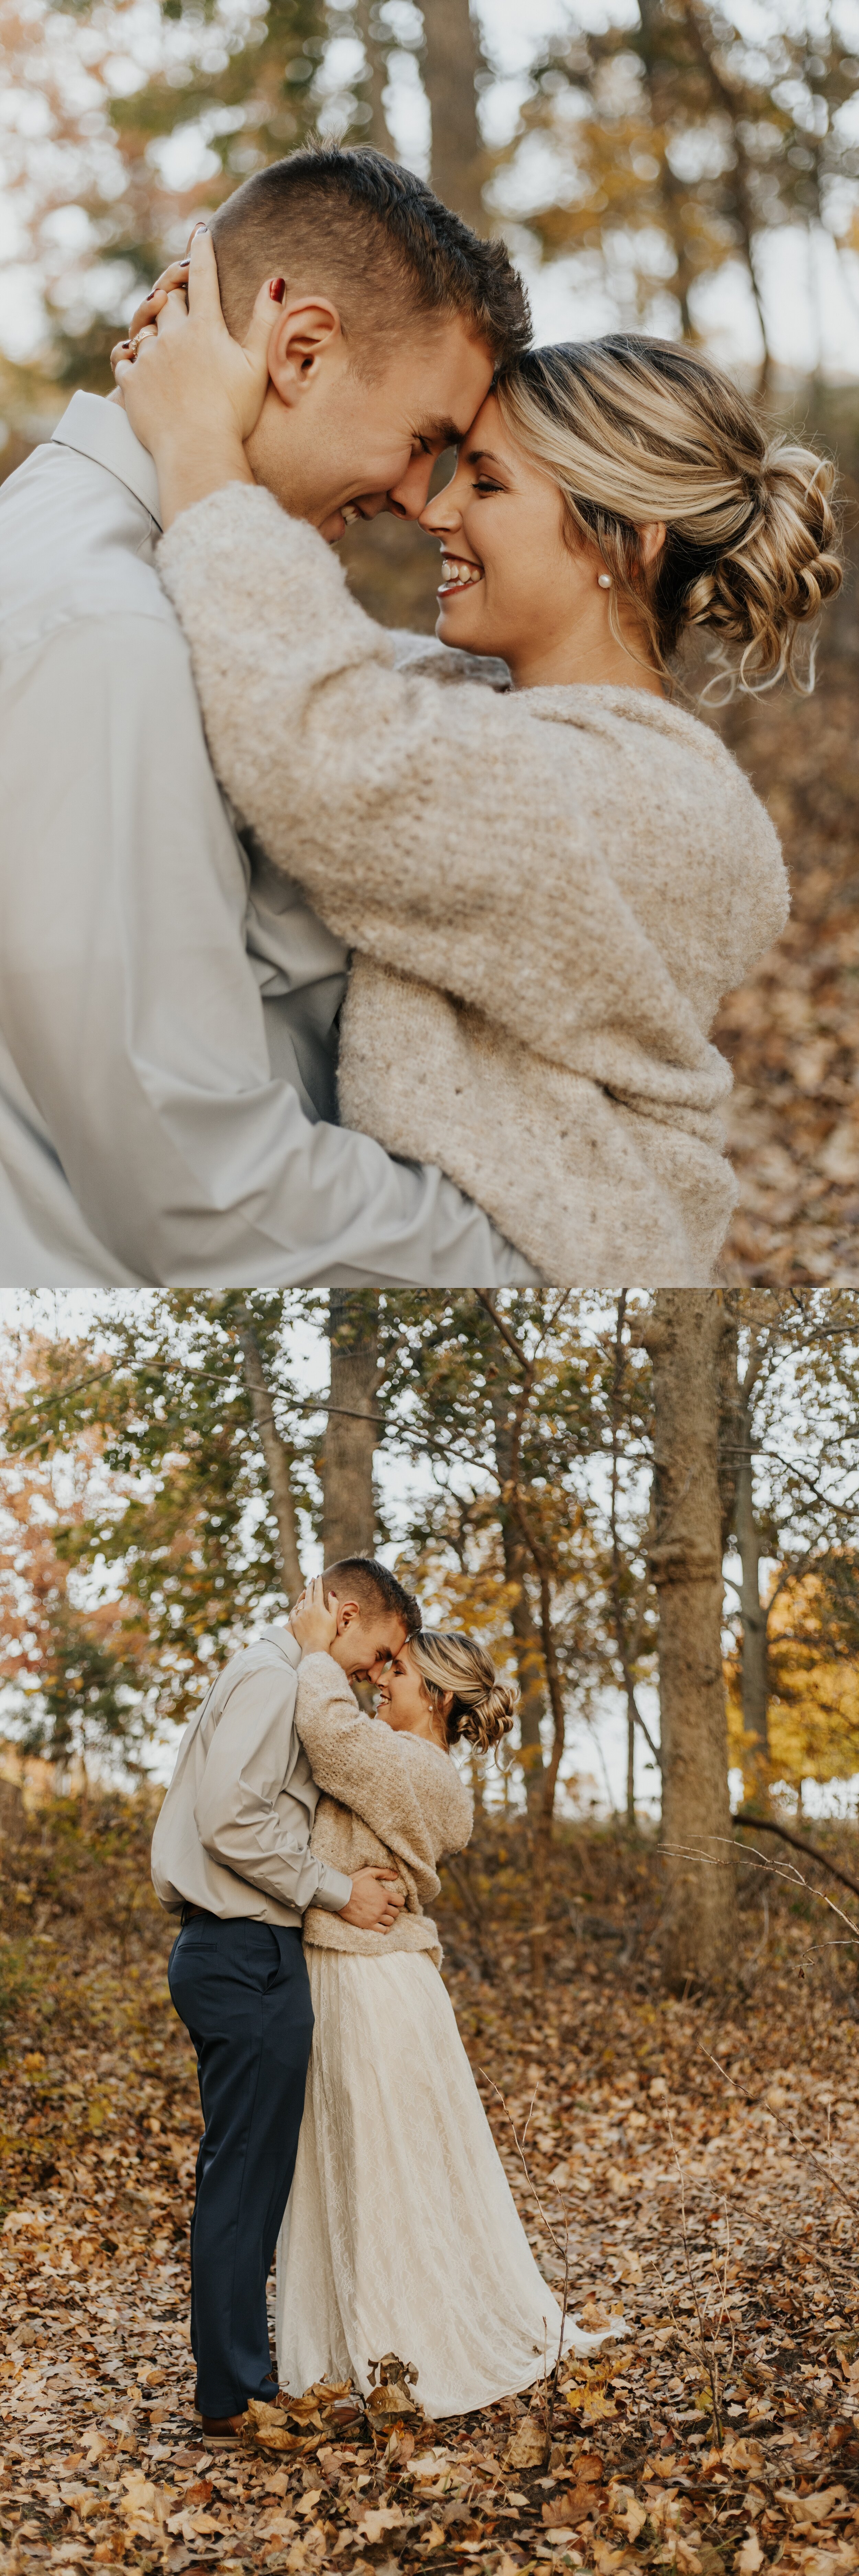 jessika-christine-photography-elopement-couples-outdoor-adventurous-session (21).jpg